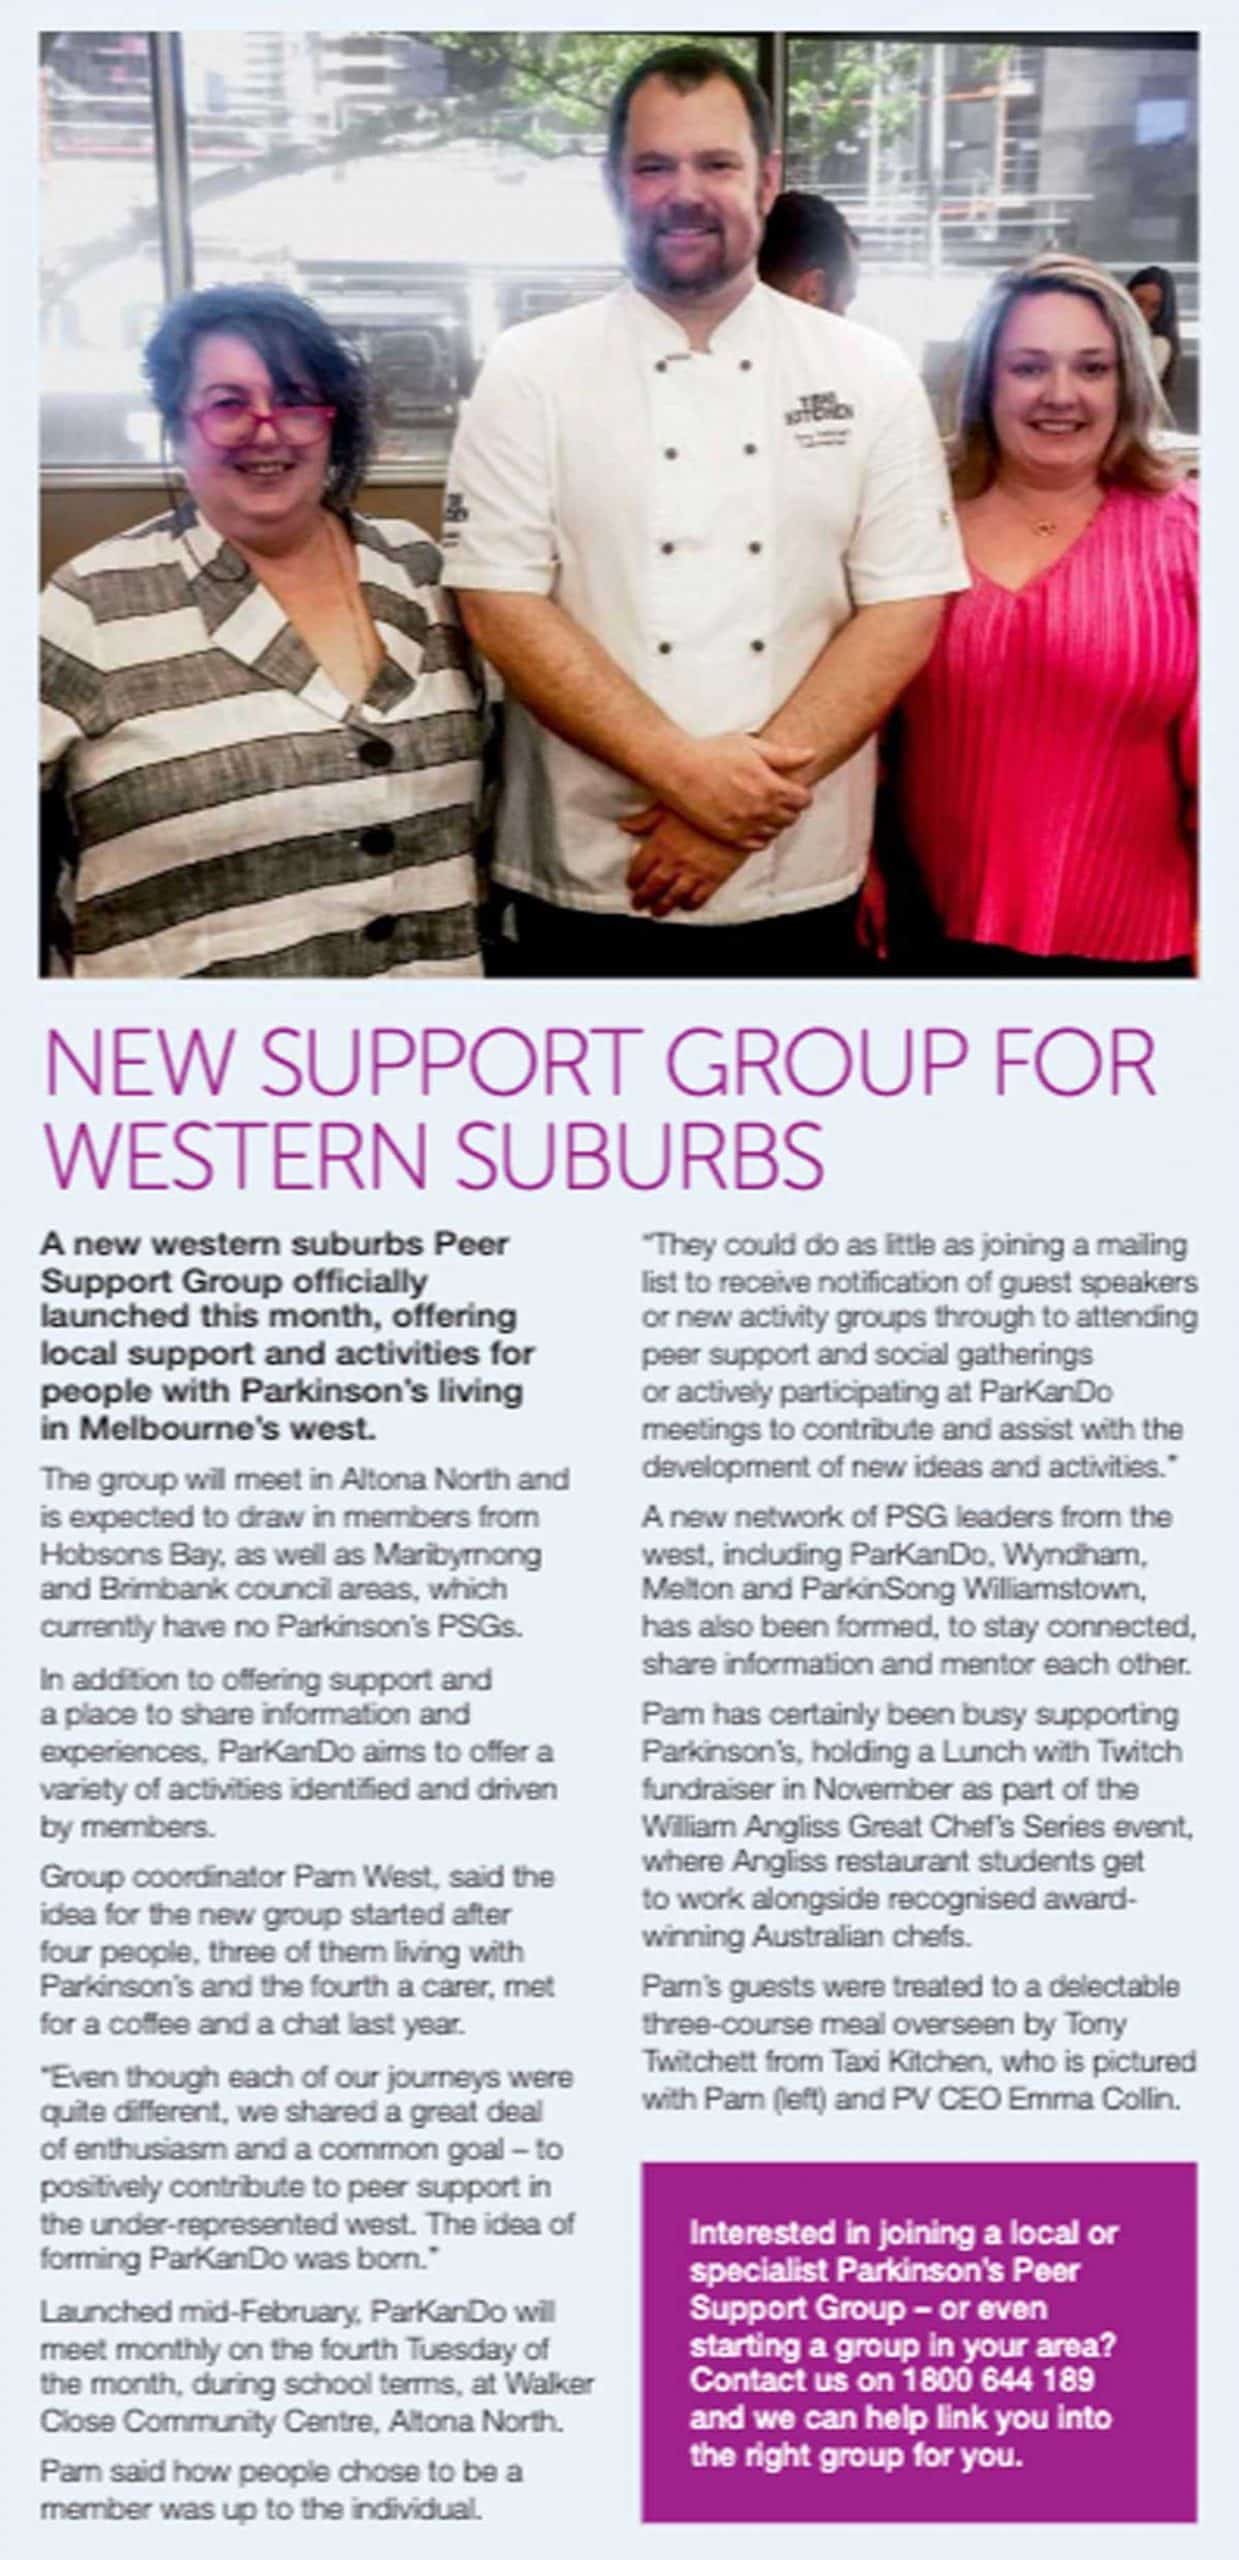 Inmotion - New Support Group for Western Suburbs